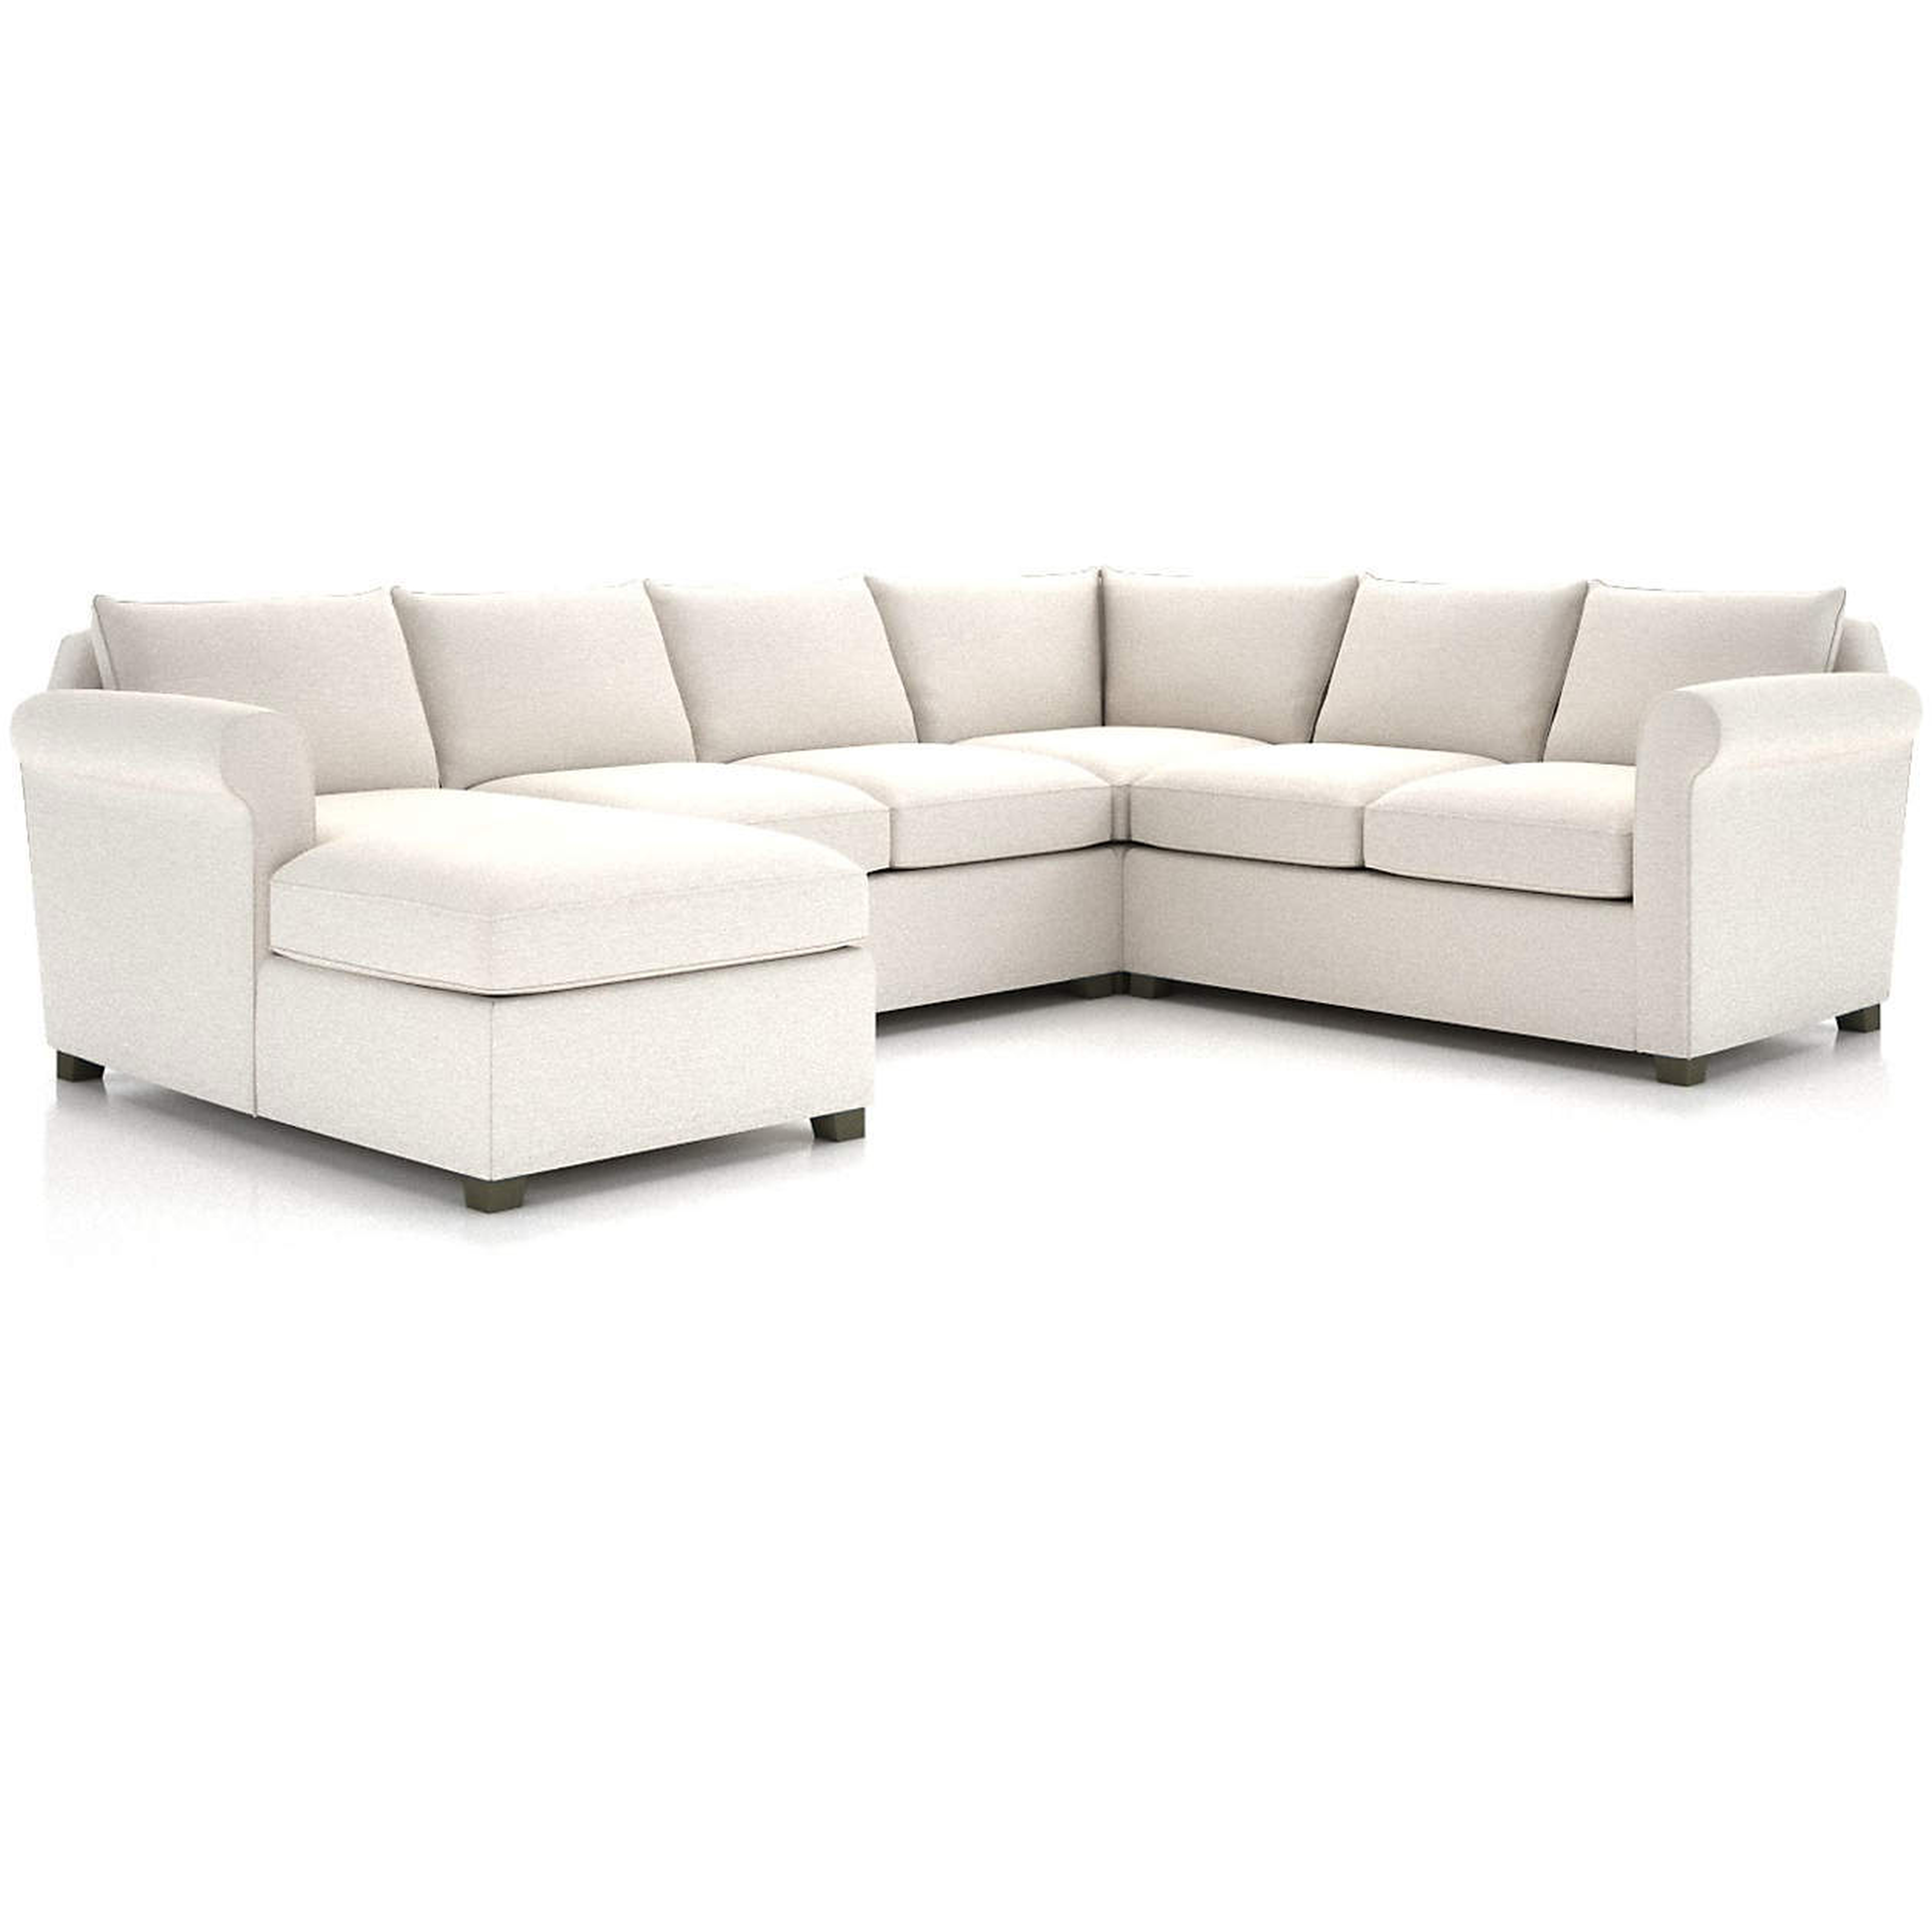 Hayward 4-Piece Left Arm Chaise Rolled Arm Sectional - Crate and Barrel